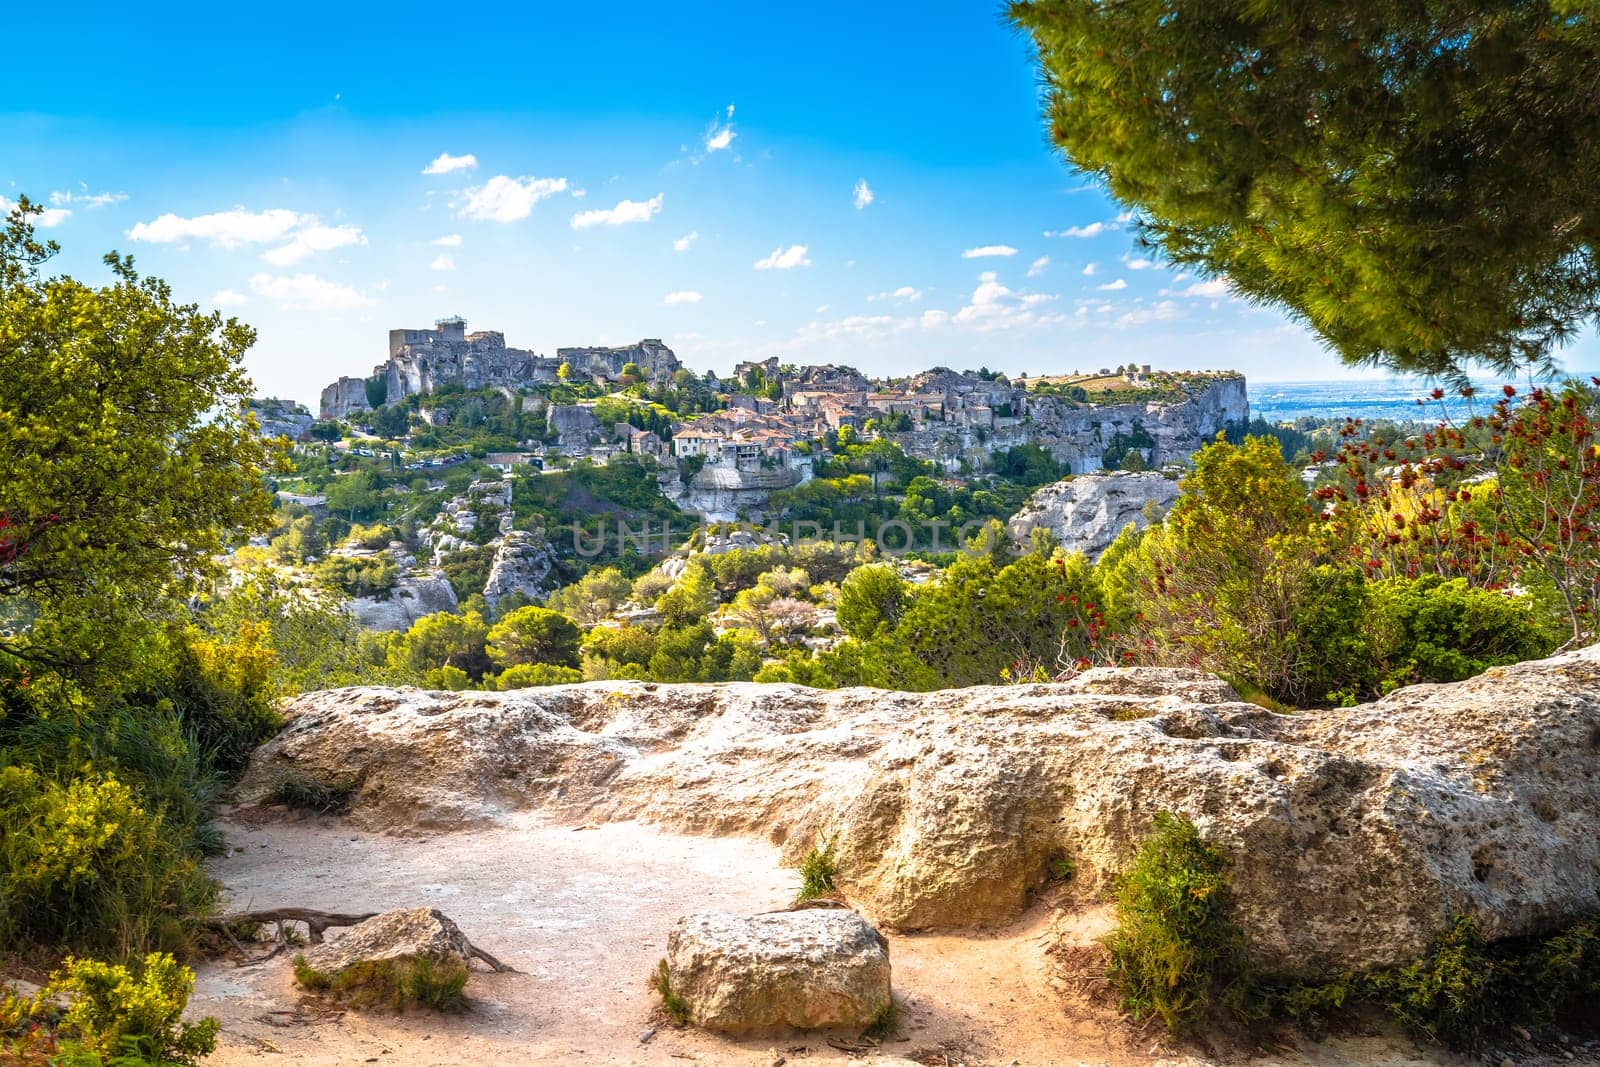 Les Baux de Provence scenic town on the rock view, southern France